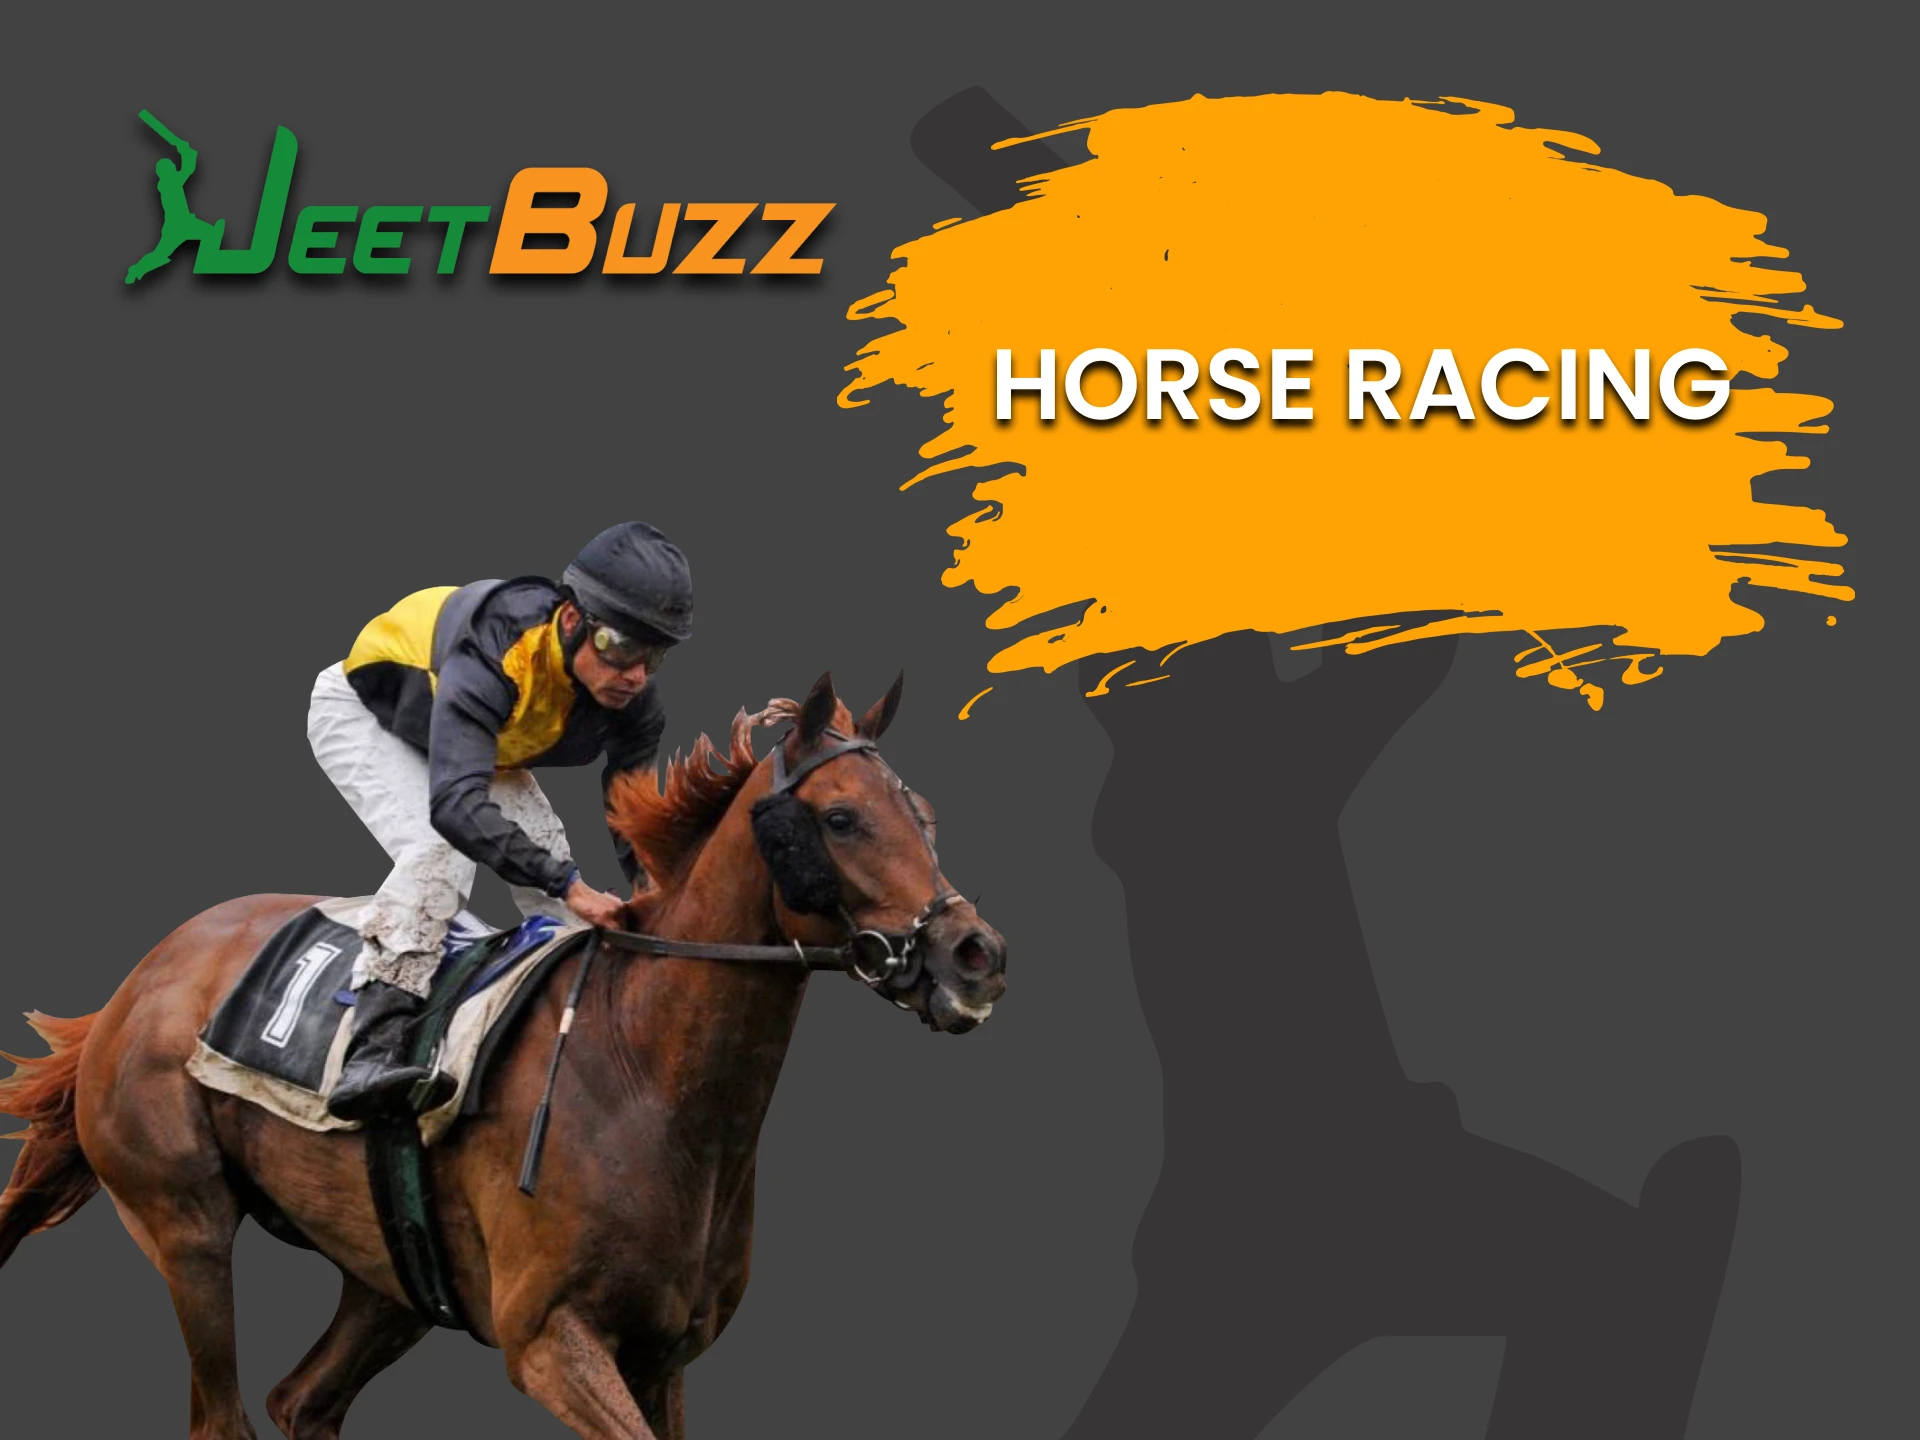 For virtual sports betting from JeetBuzz, choose Horse Racing.